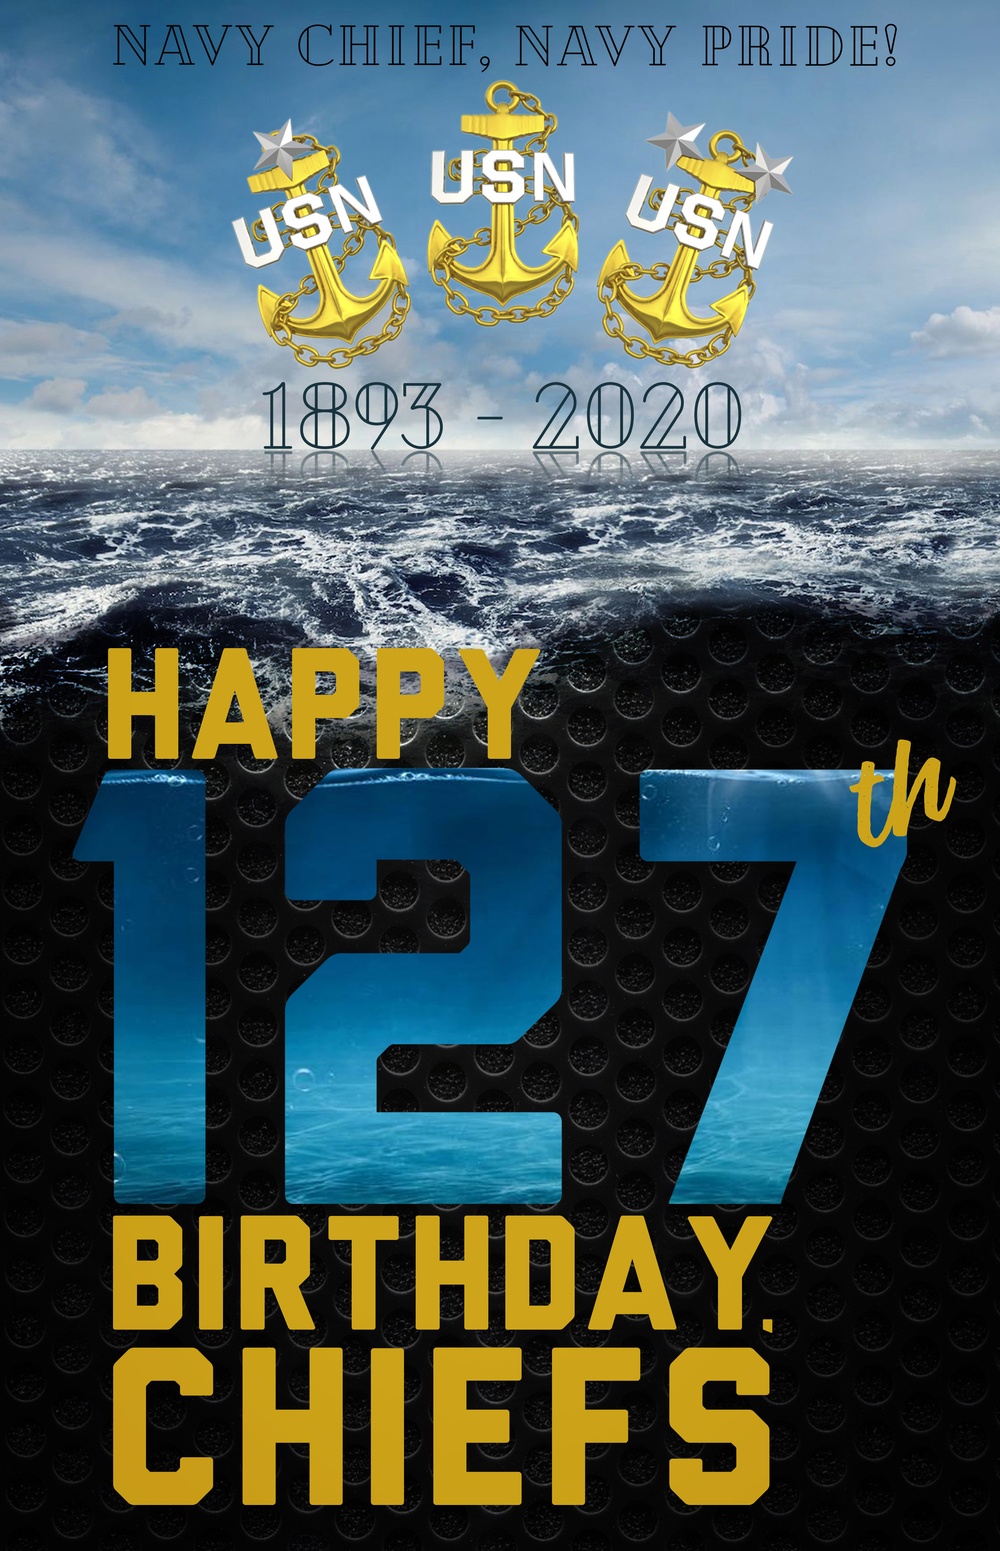 DVIDS Images Navy Chief Petty Officers Birthday Graphic